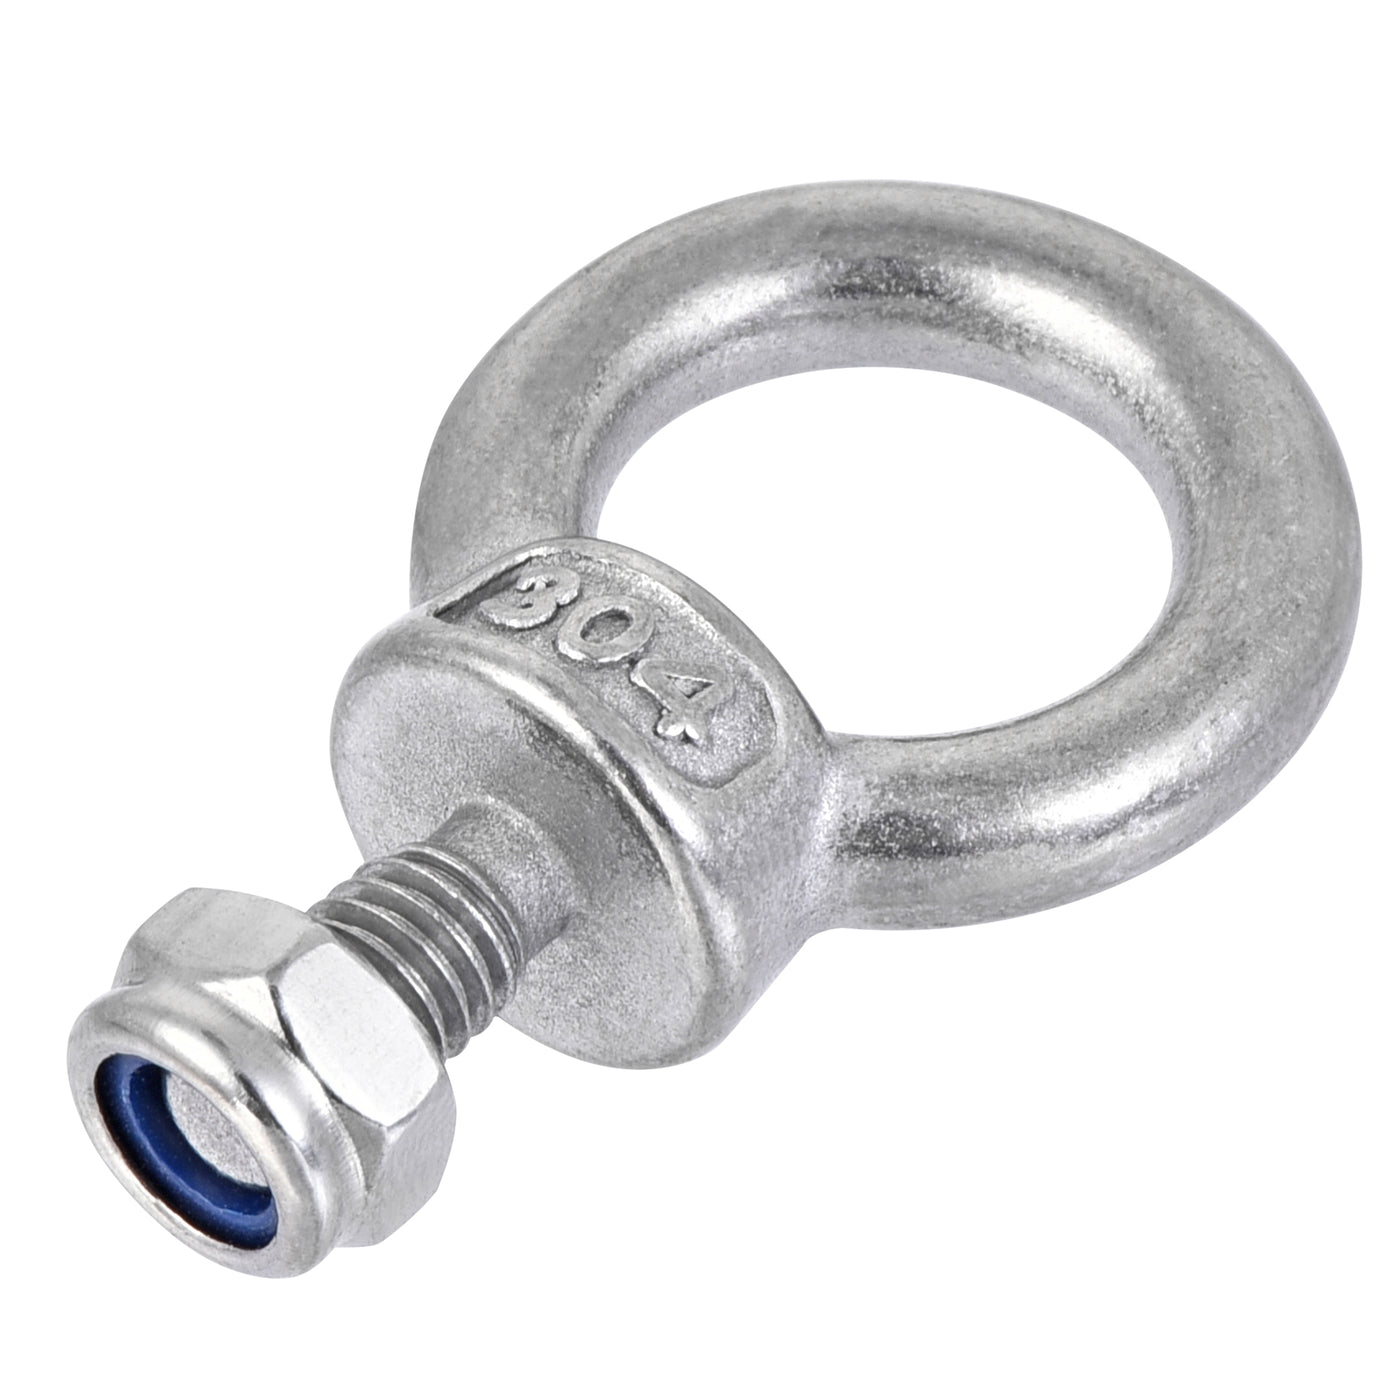 uxcell Uxcell Lifting Eye Bolt M6 x 12mm Male Thread with Hex Screw Nut for Hanging, 304 Stainless Steel, 6 Sets